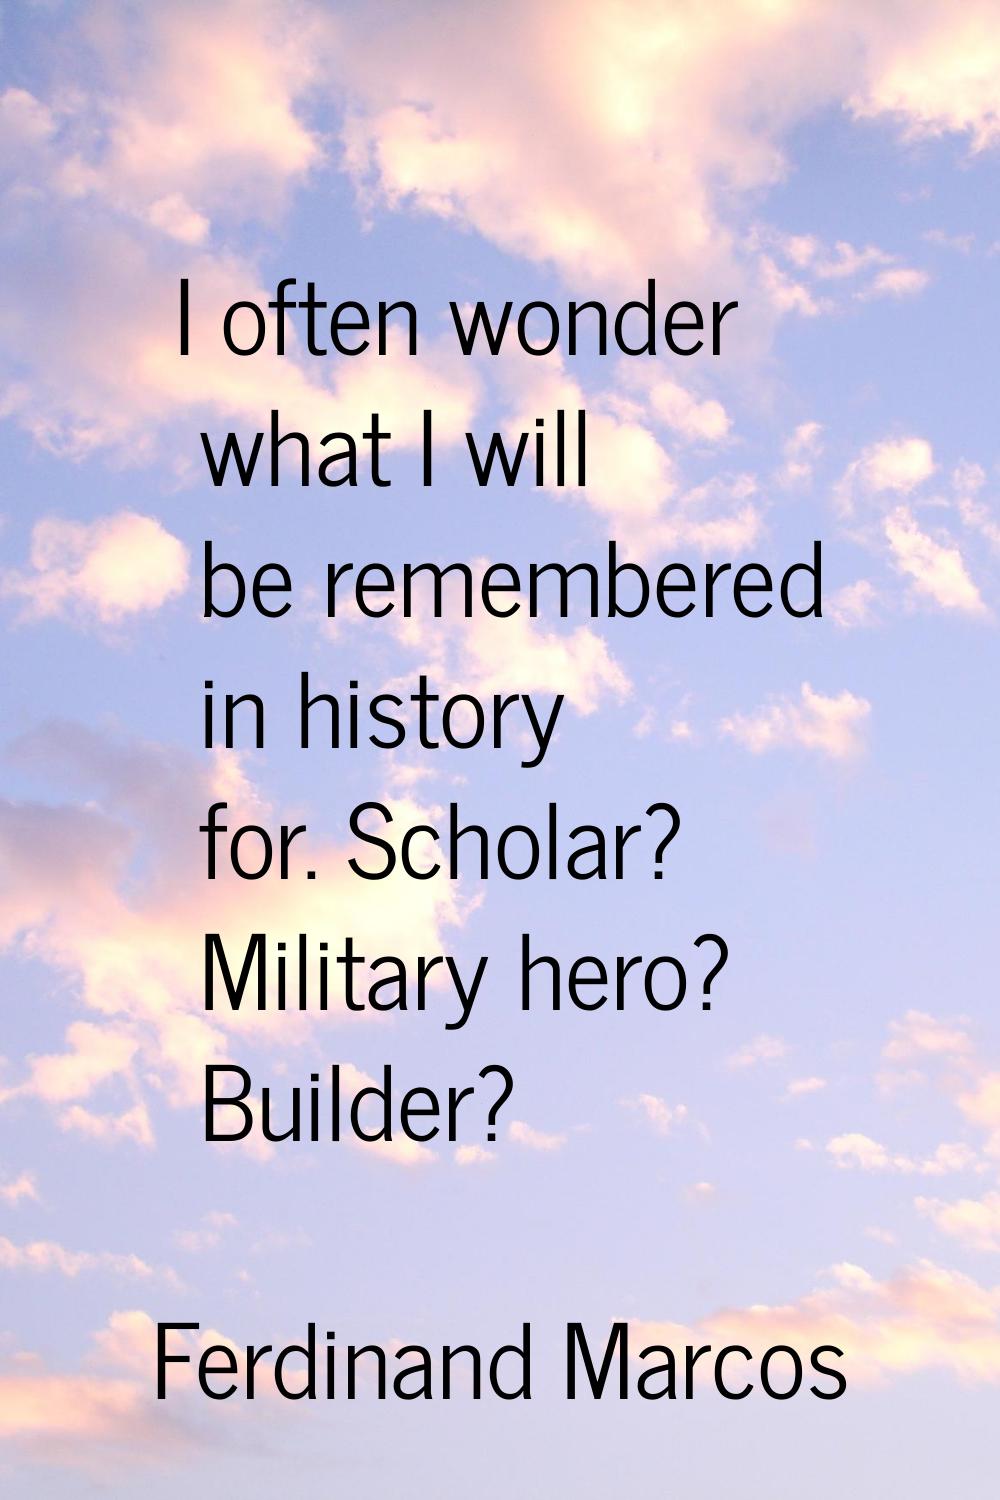 I often wonder what I will be remembered in history for. Scholar? Military hero? Builder?